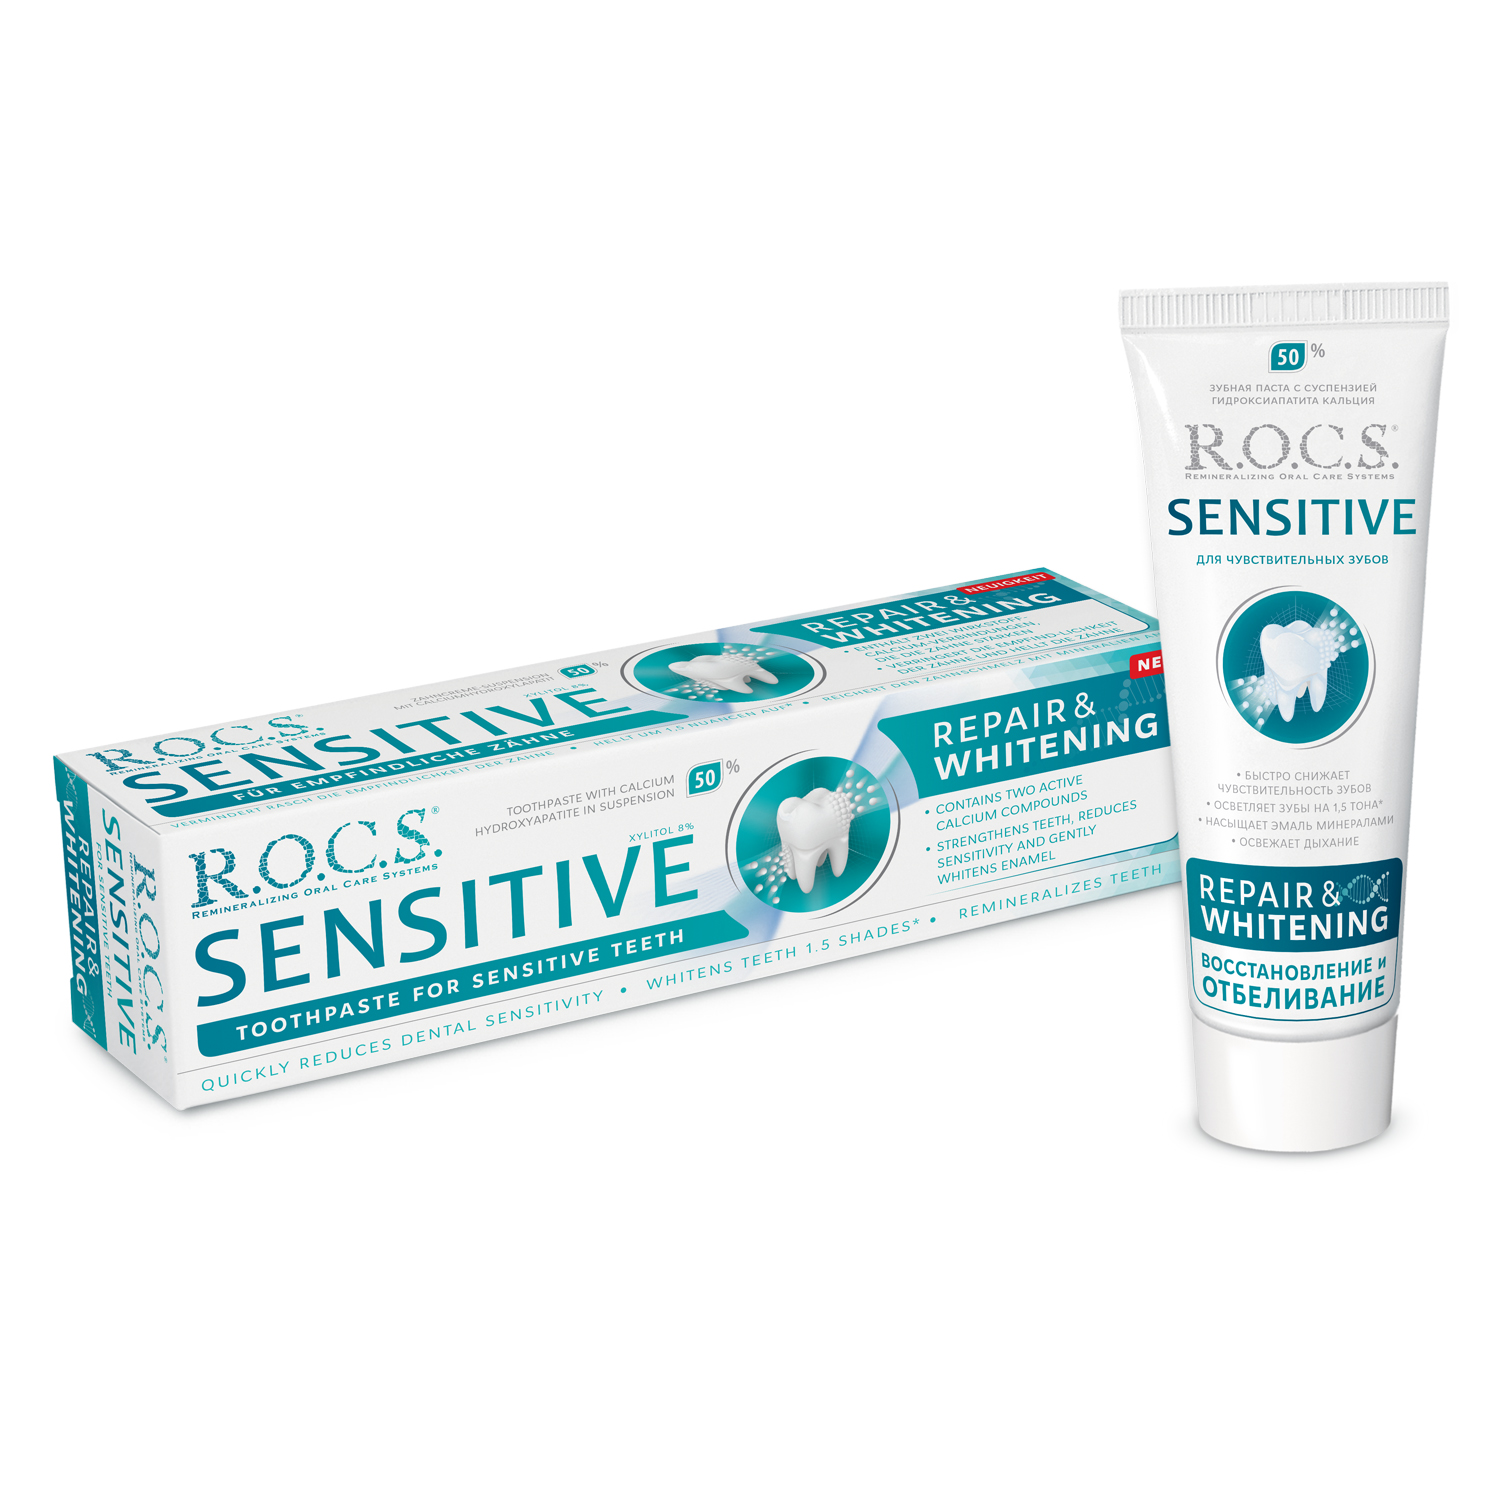 R.O.C.S. Sensitive and Whitening Toothpaste